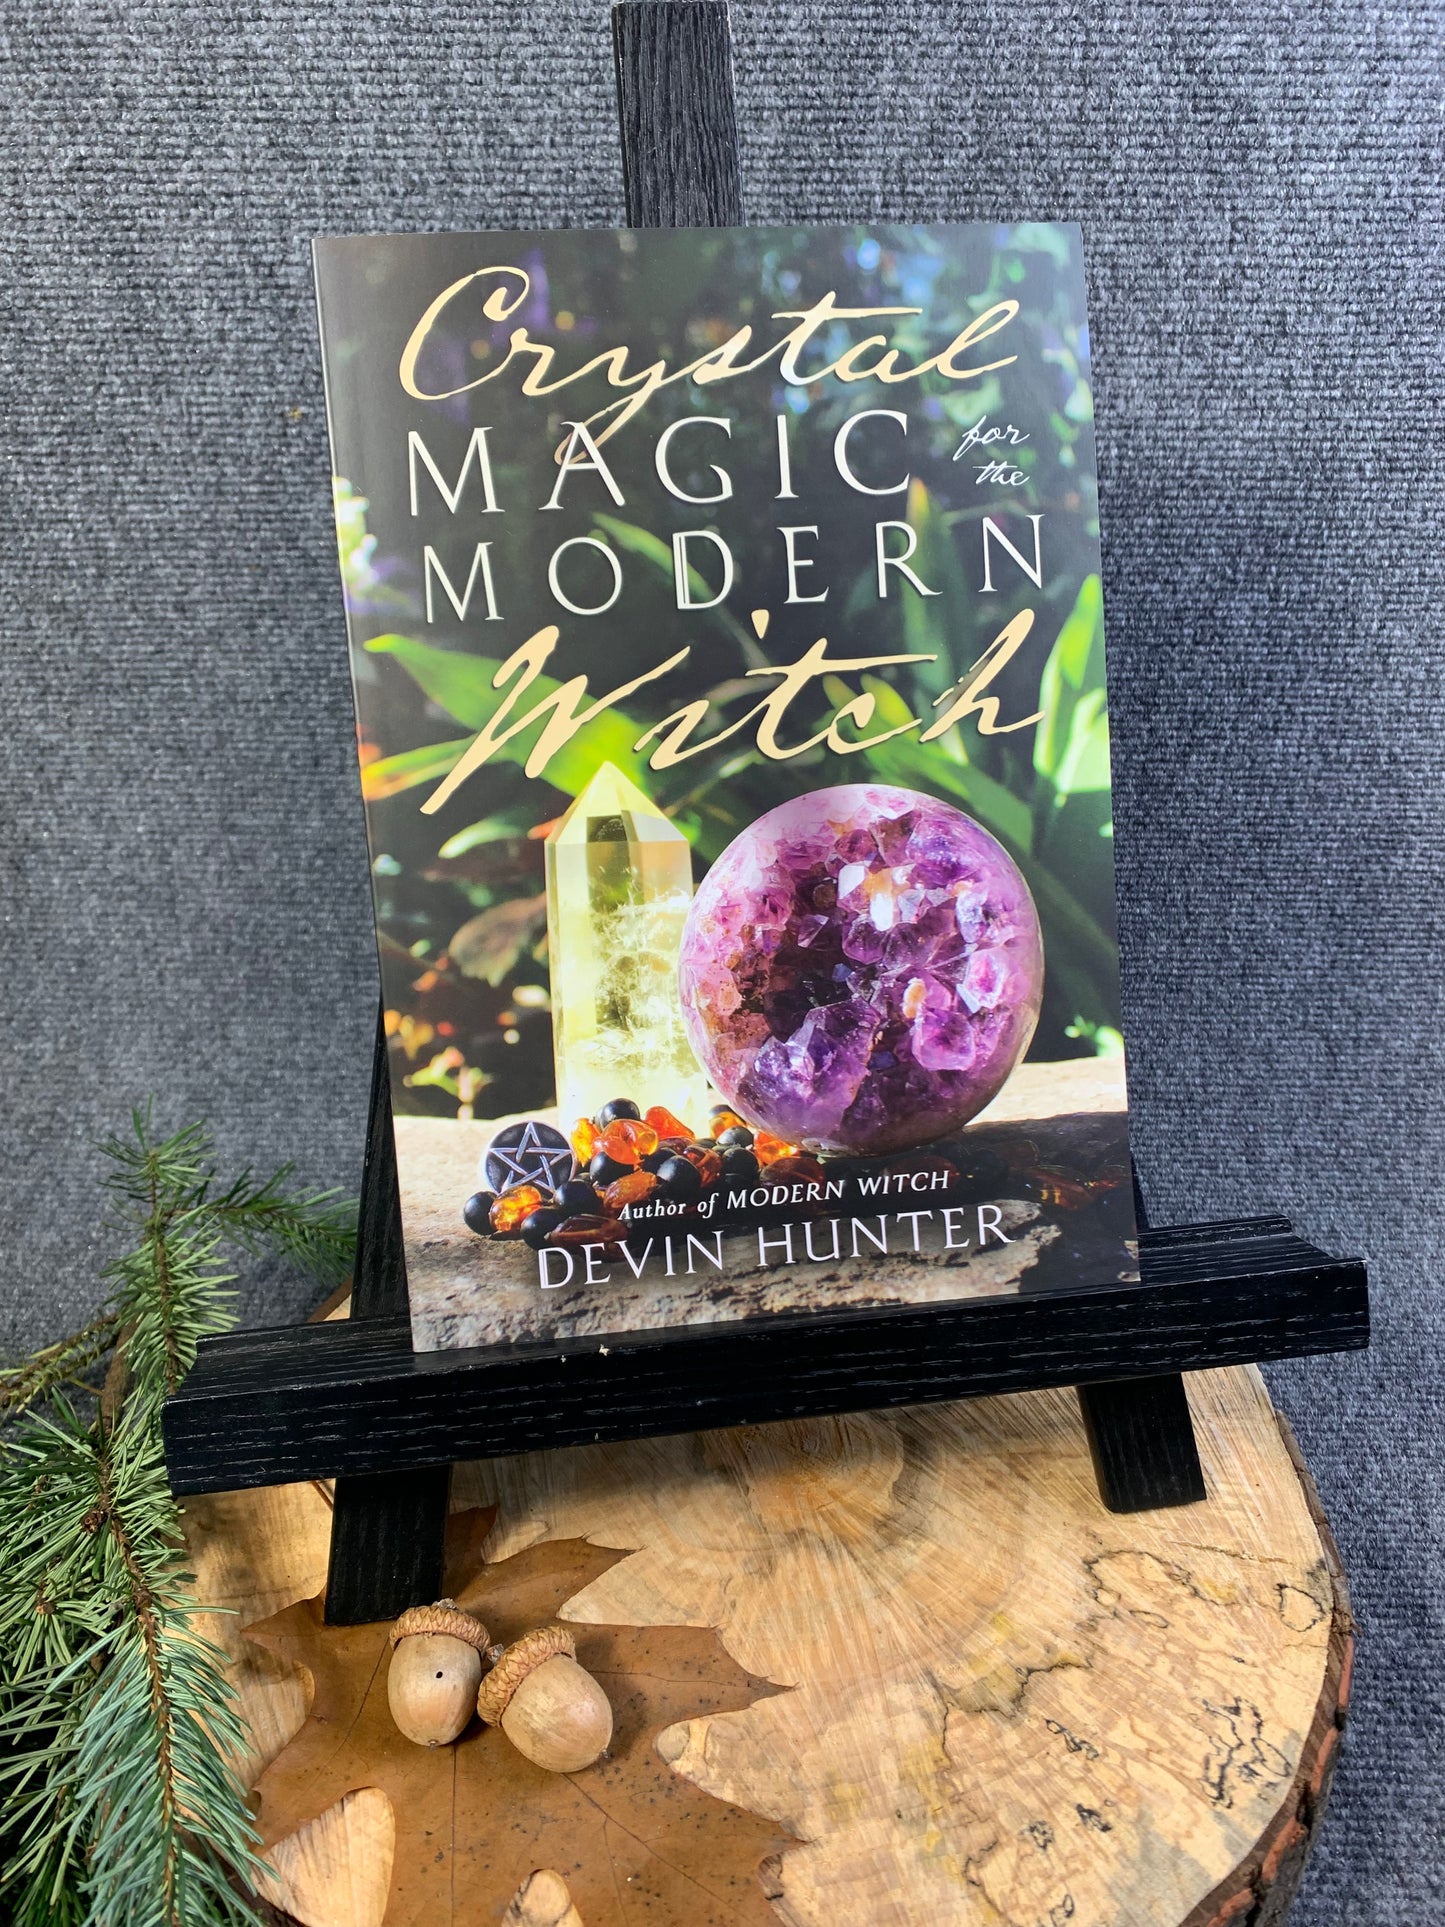 Crystal Magic for the Modern Witch by Devon Hunter